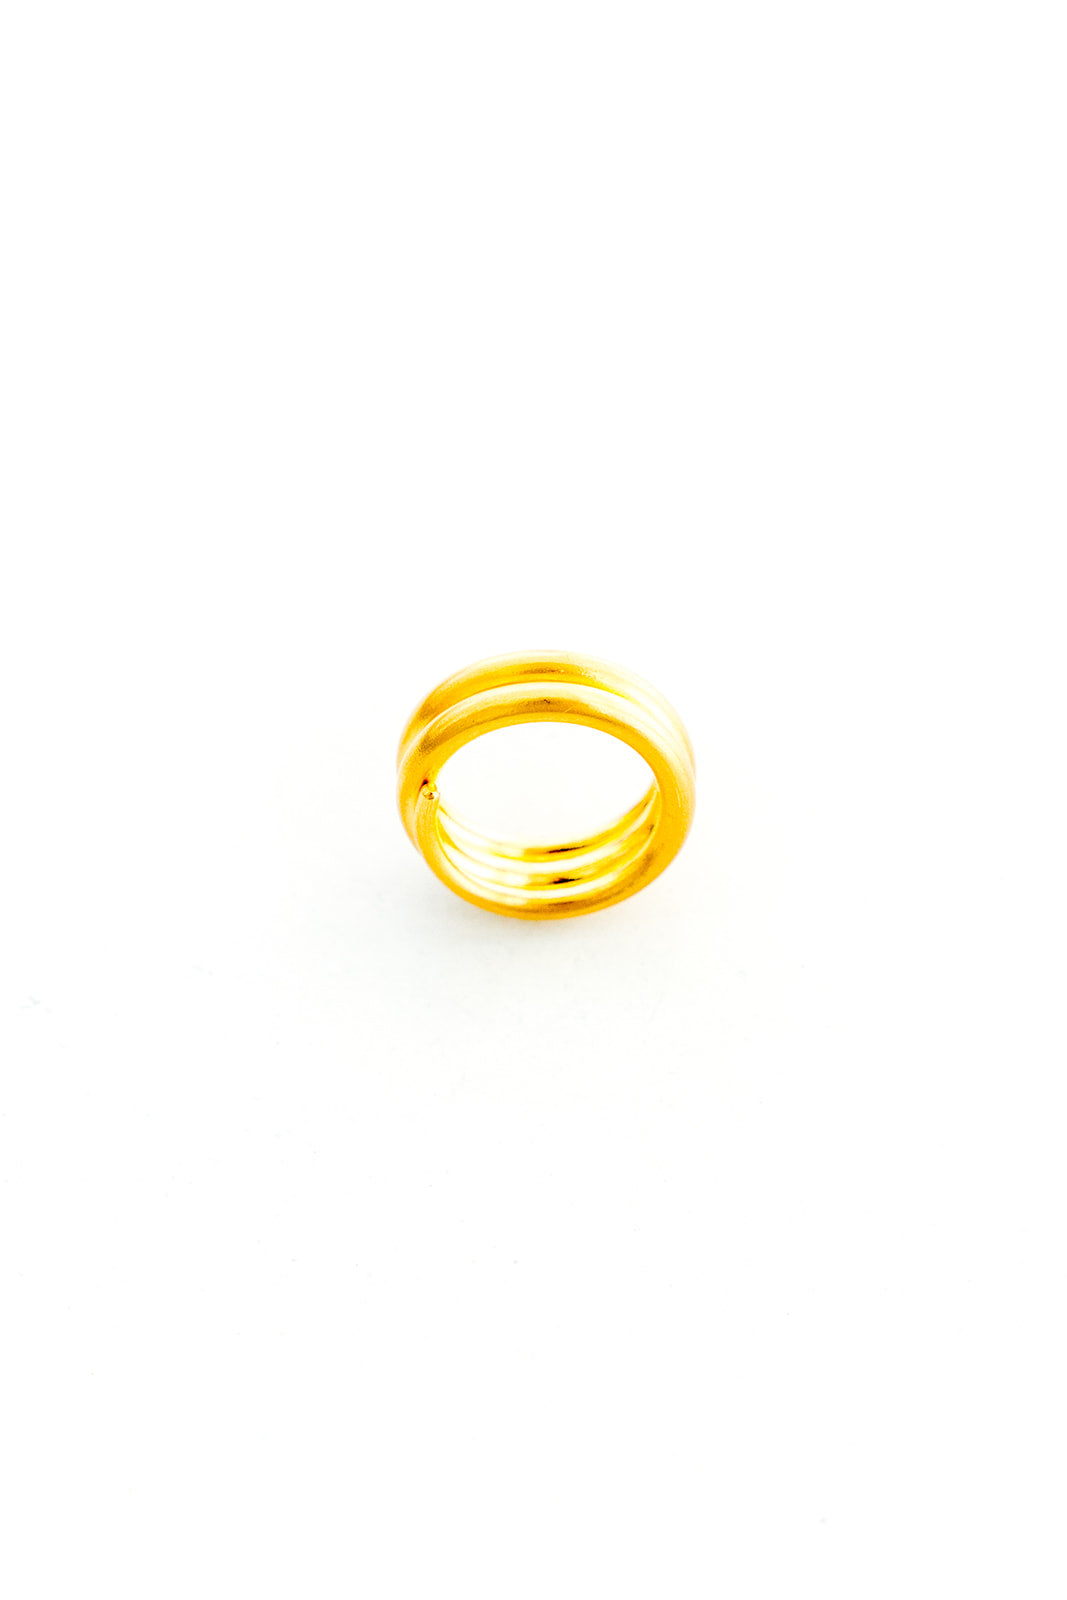 22K Yellow Gold 3 Coil Ring